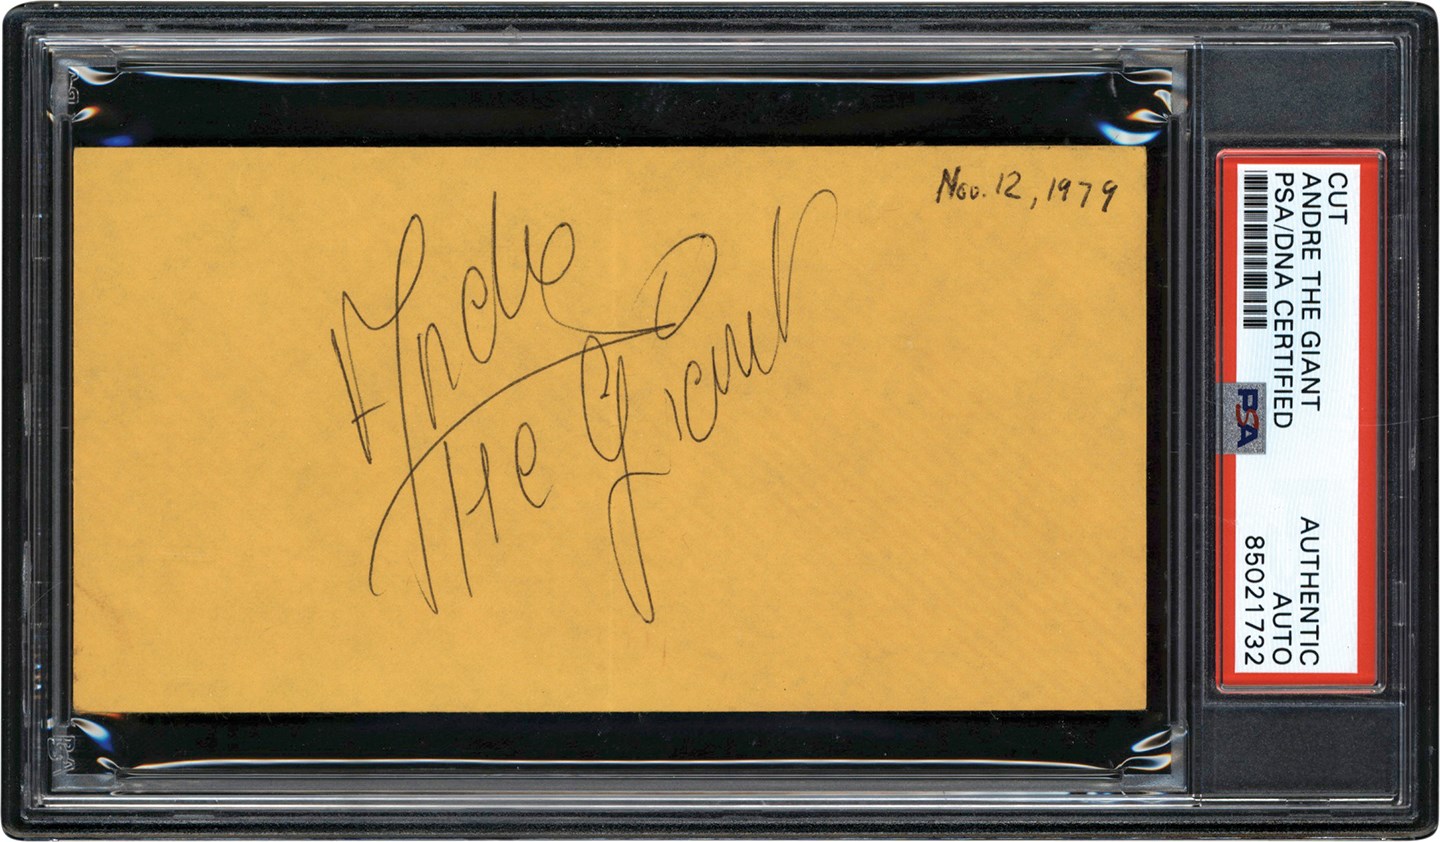 Olympics and All Sports - Andre the Giant Signature (PSA)